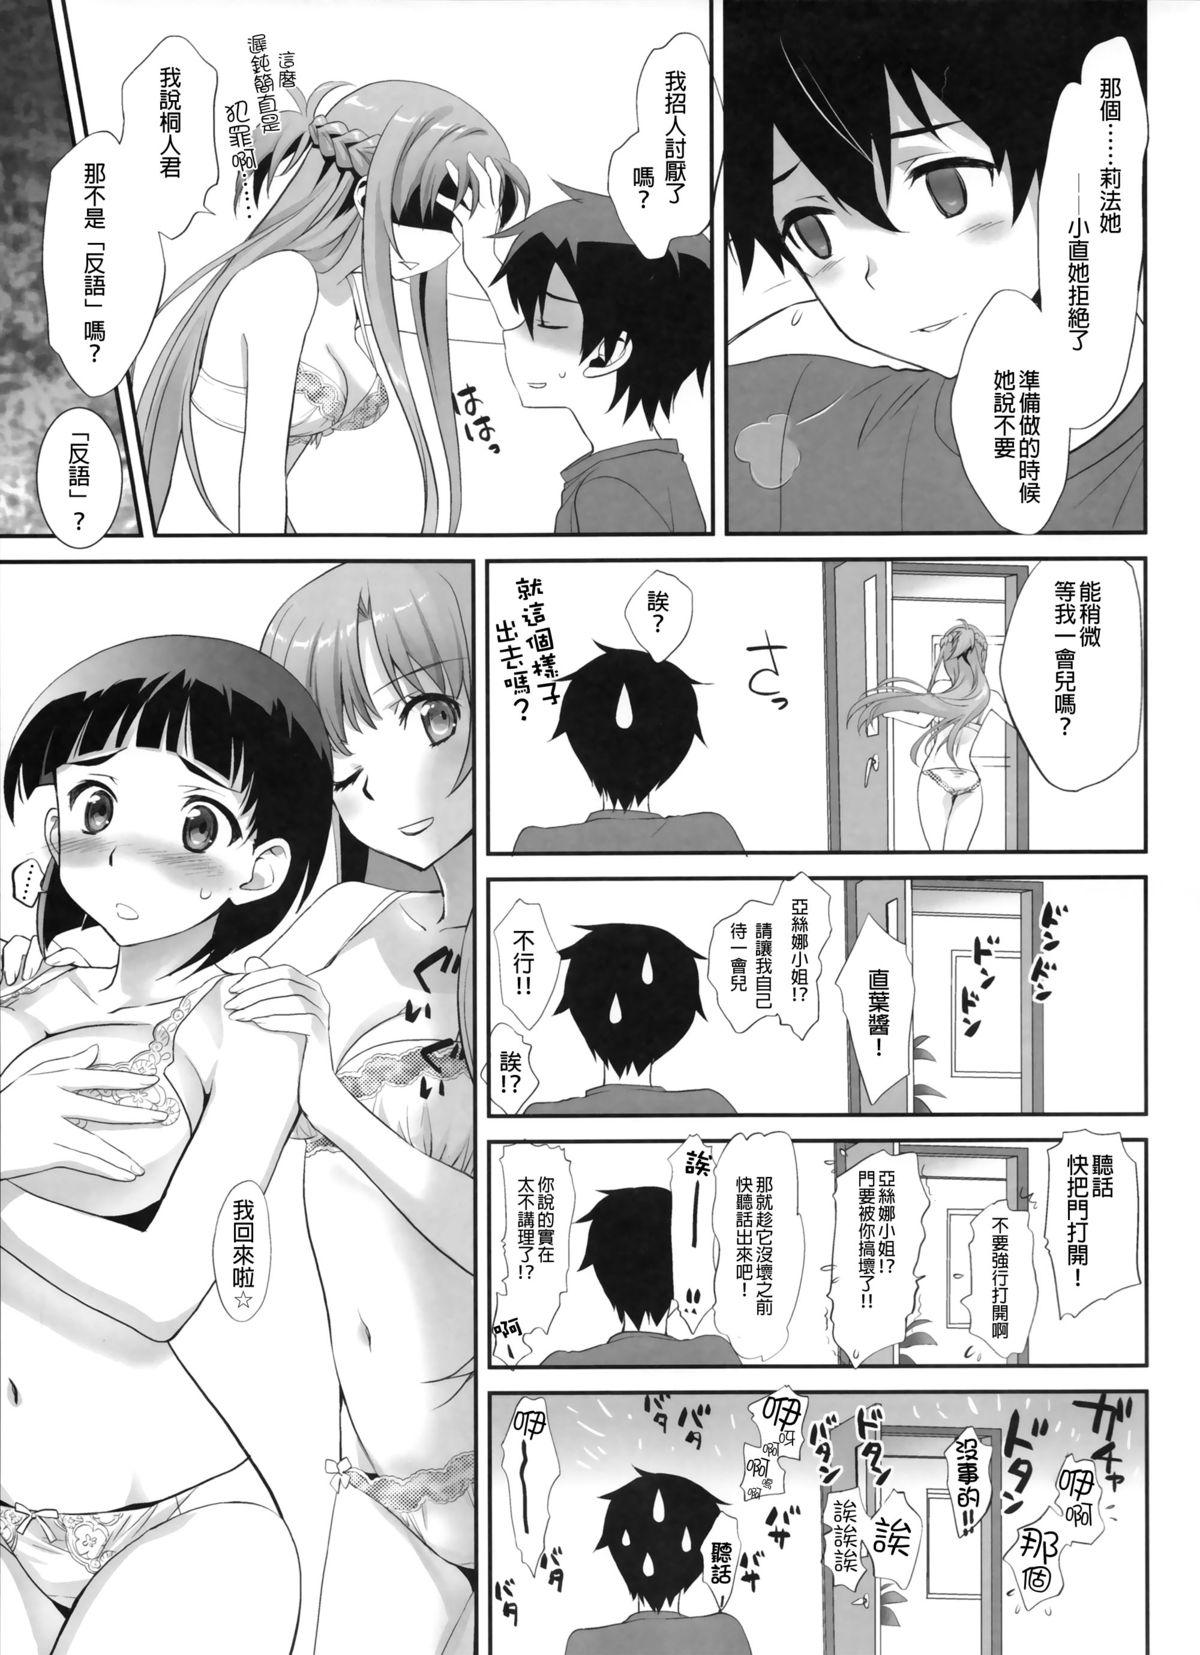 Natural Tits Sunny-side up? - Sword art online Animation - Page 13